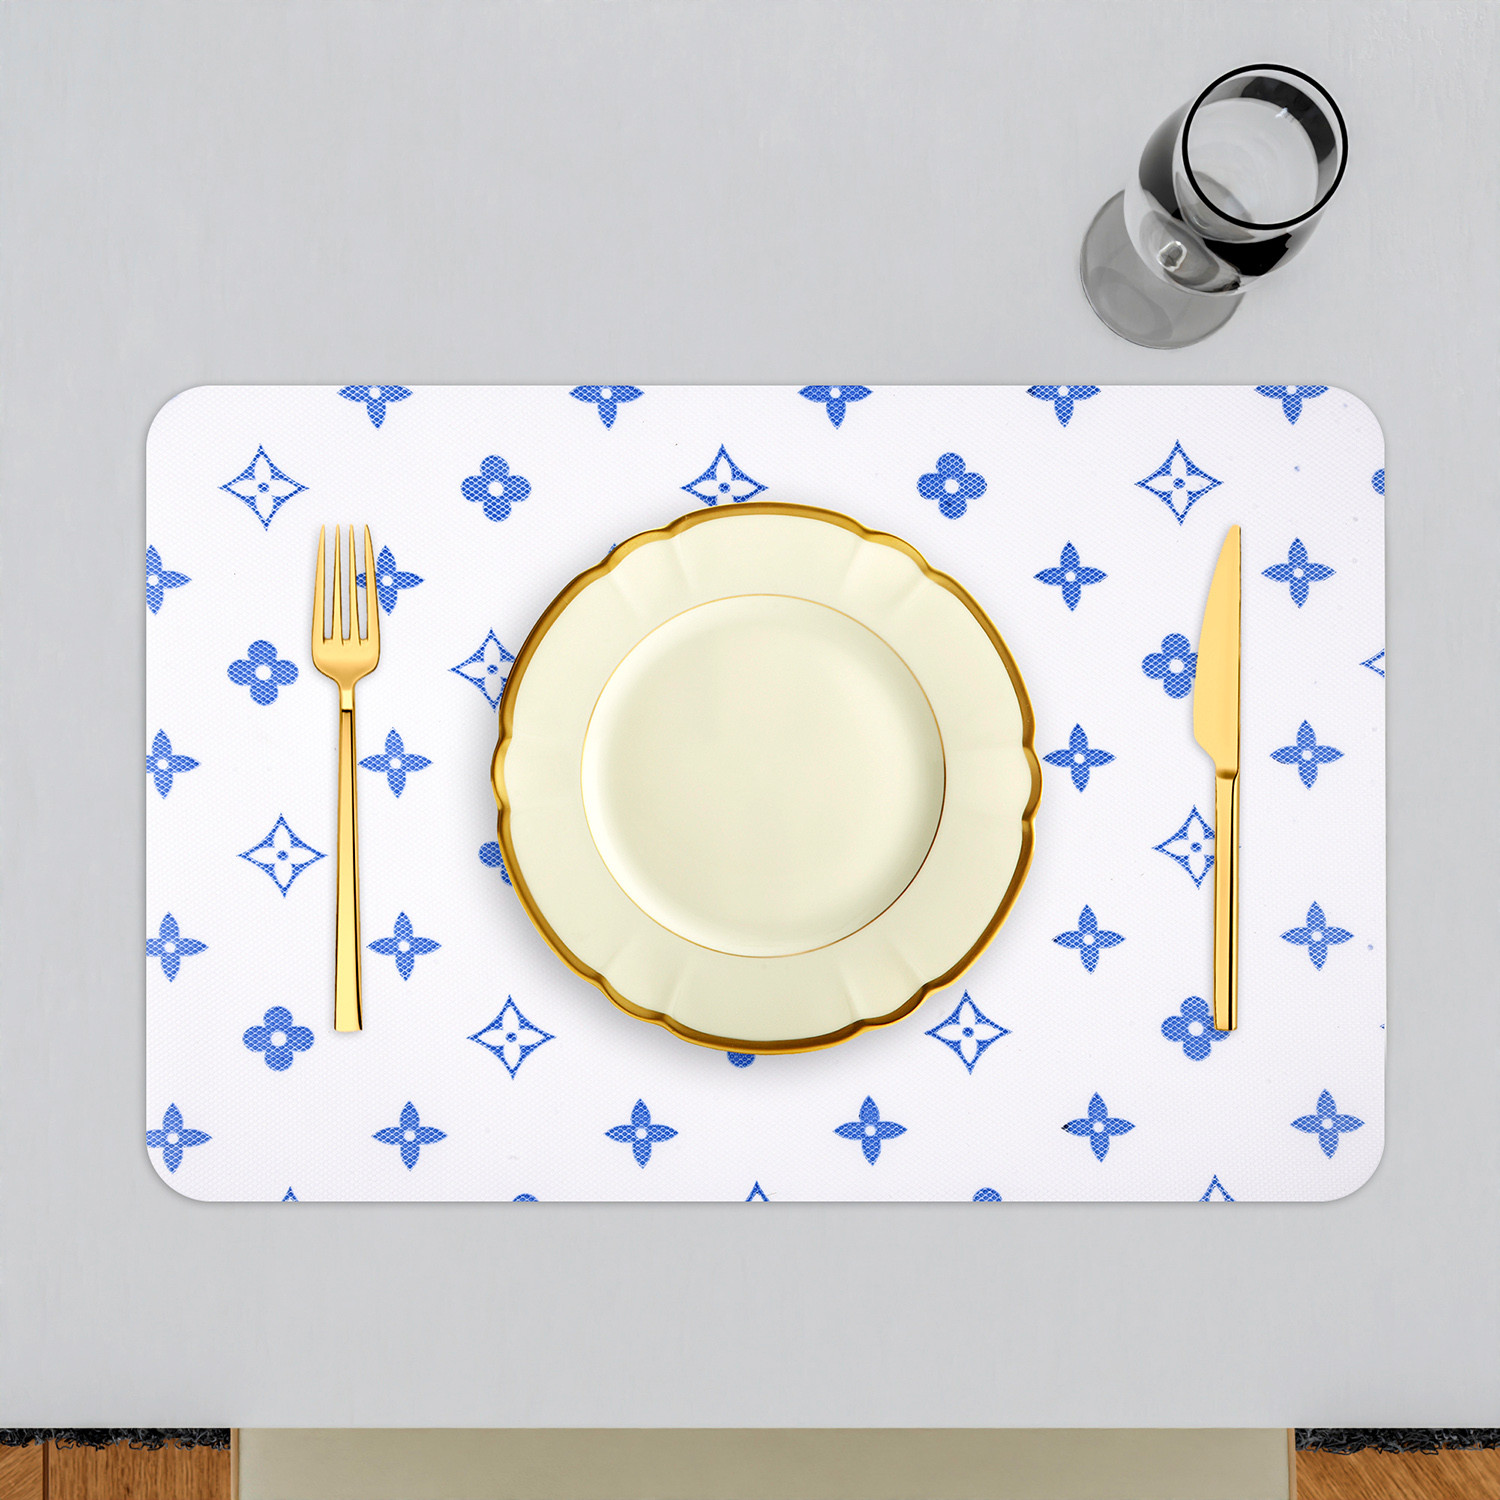 Kuber Industries Placemat | Placemats for Dining Room | Anti-Slip Table Mat Set | Placemats for Kitchen Table | Dining Table Placemats | Blue Star-Design Placemat | 6 Piece Set | White